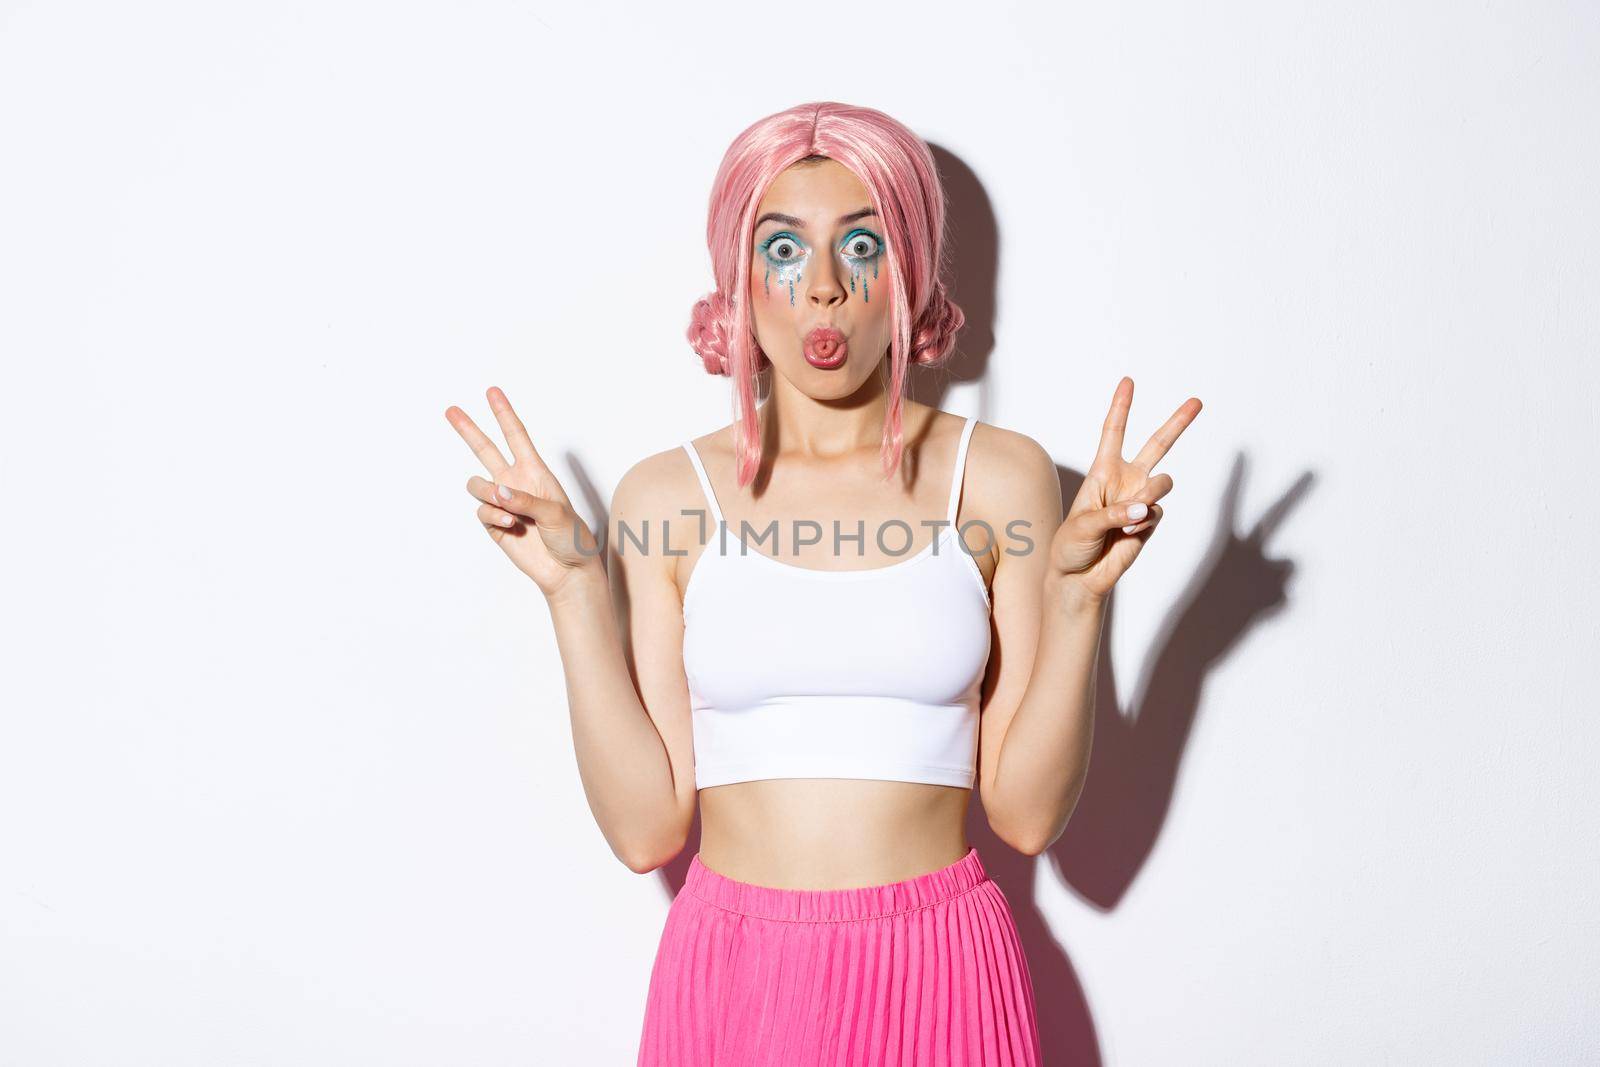 Image of silly girl in pink wig, celebrating halloween, showing funny faces and sticking tongue, make peace signs, standing over white background.